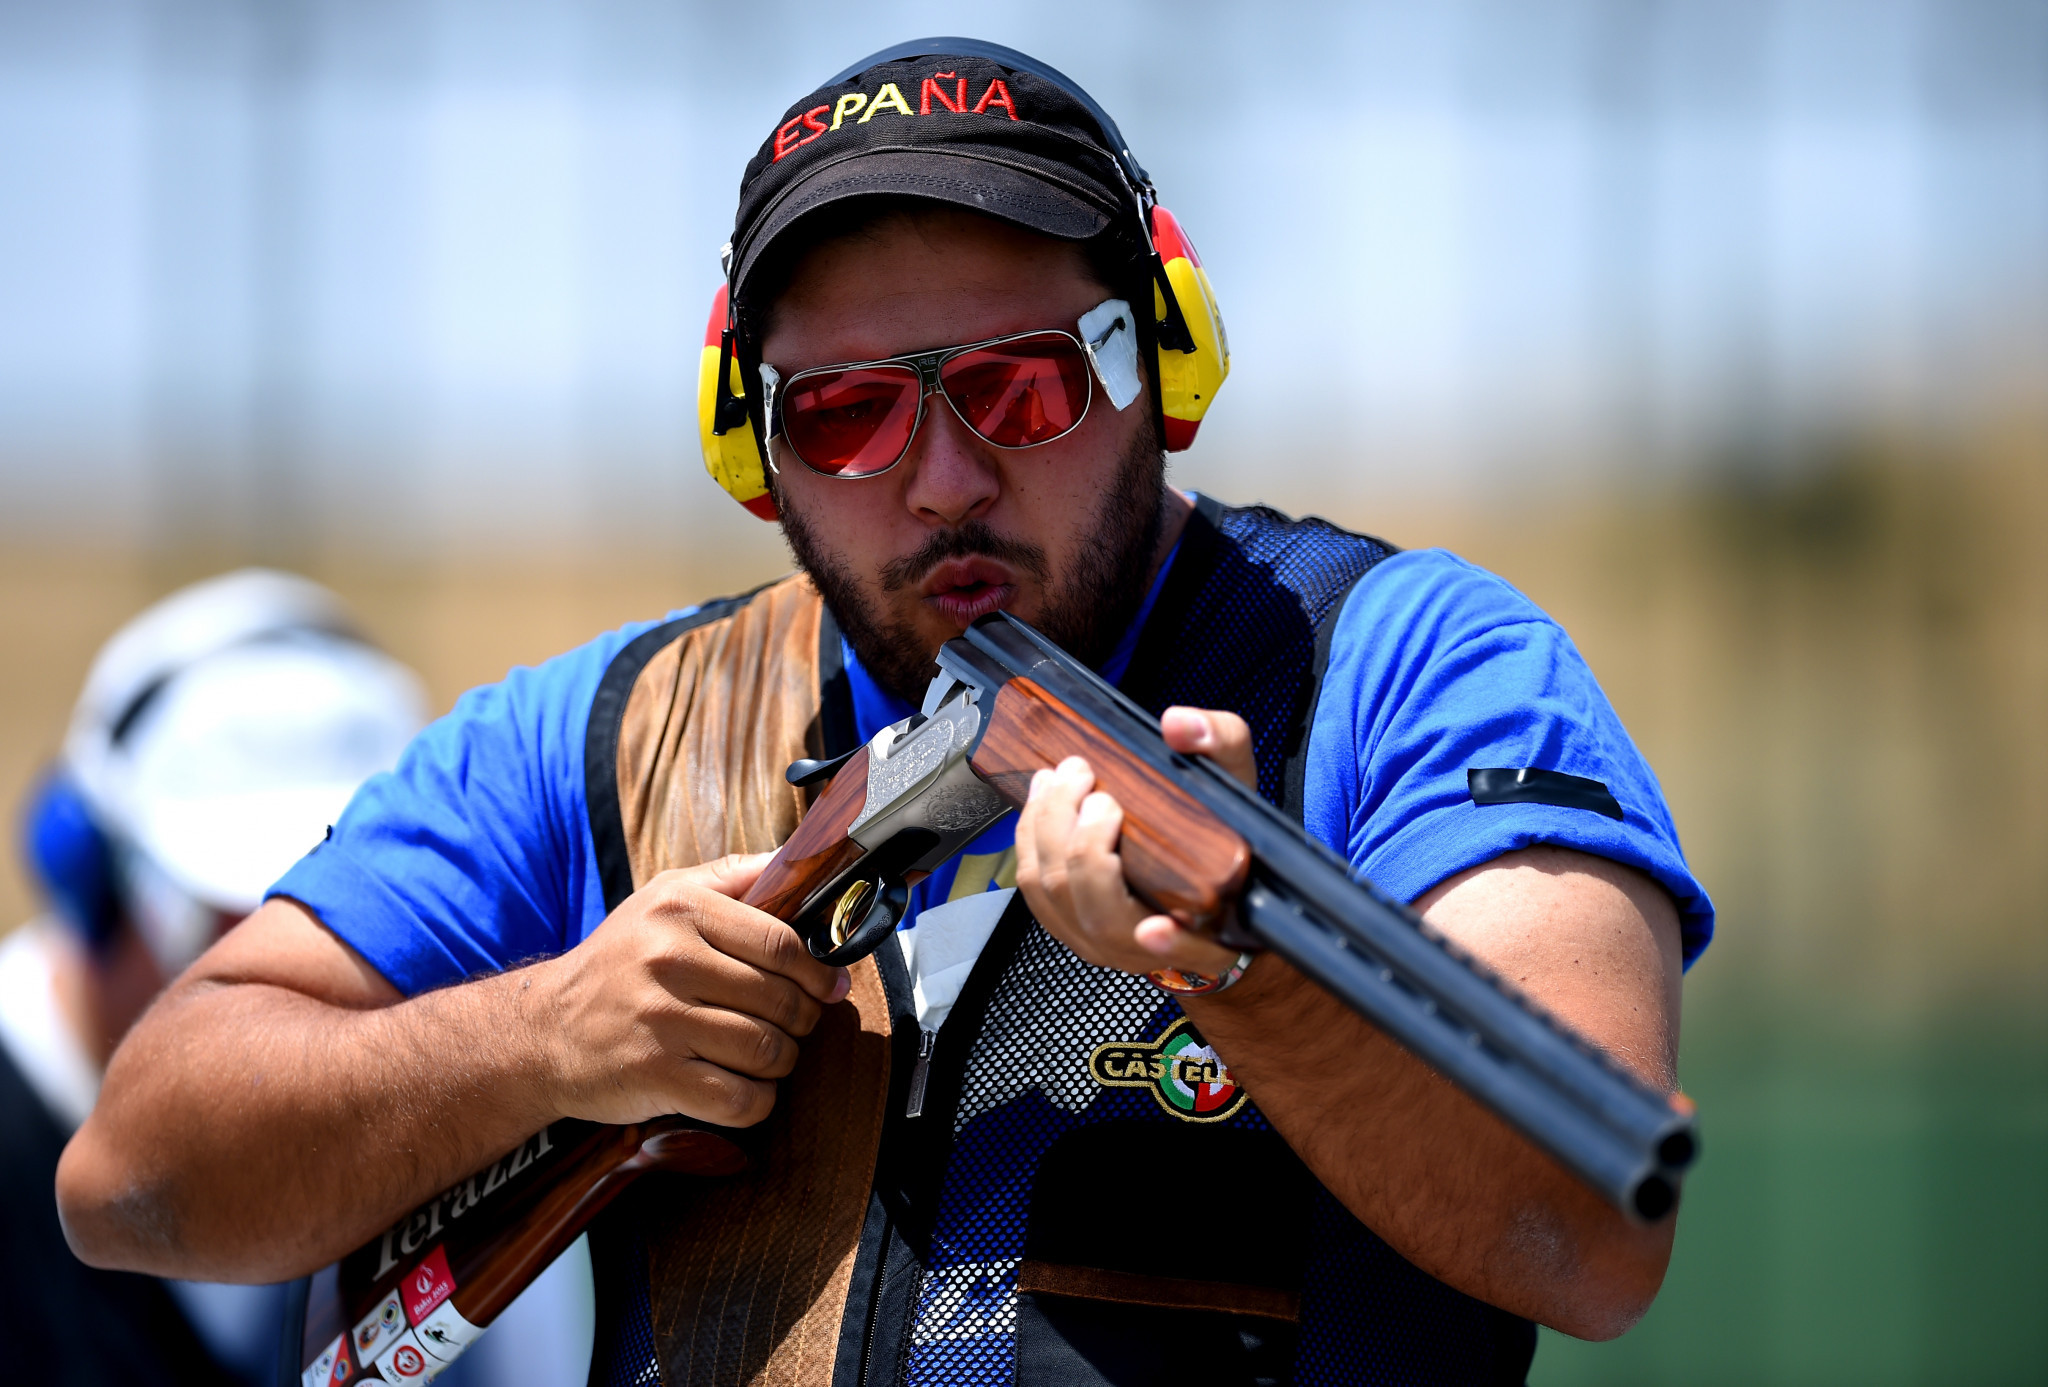 Fernández and Ragazzini win gold at ISSF Shotgun World Cup in Lima